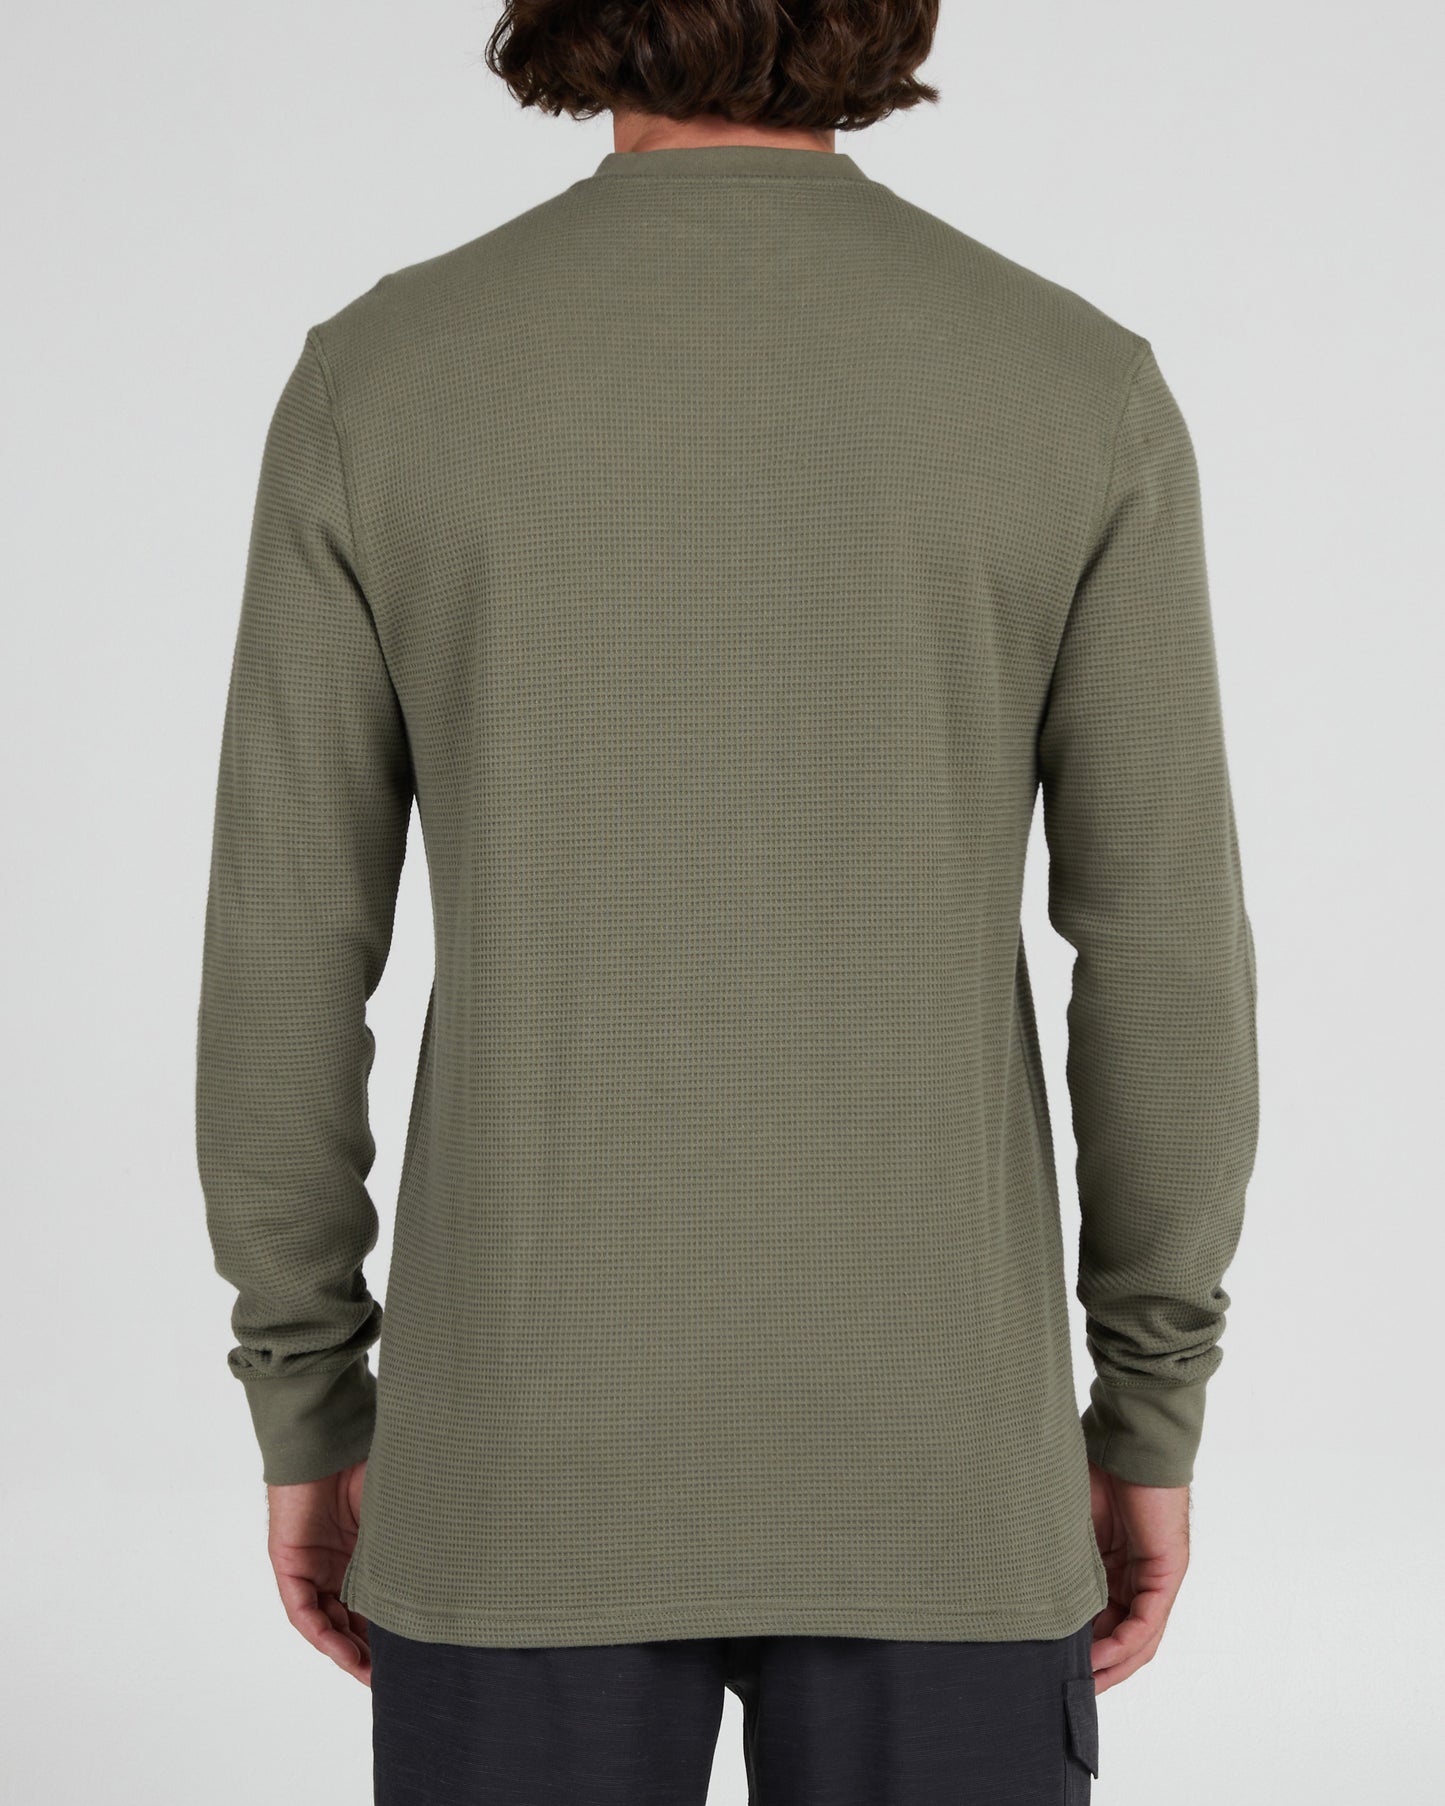 back view of Daybreak 2 Olive L/S Thermal